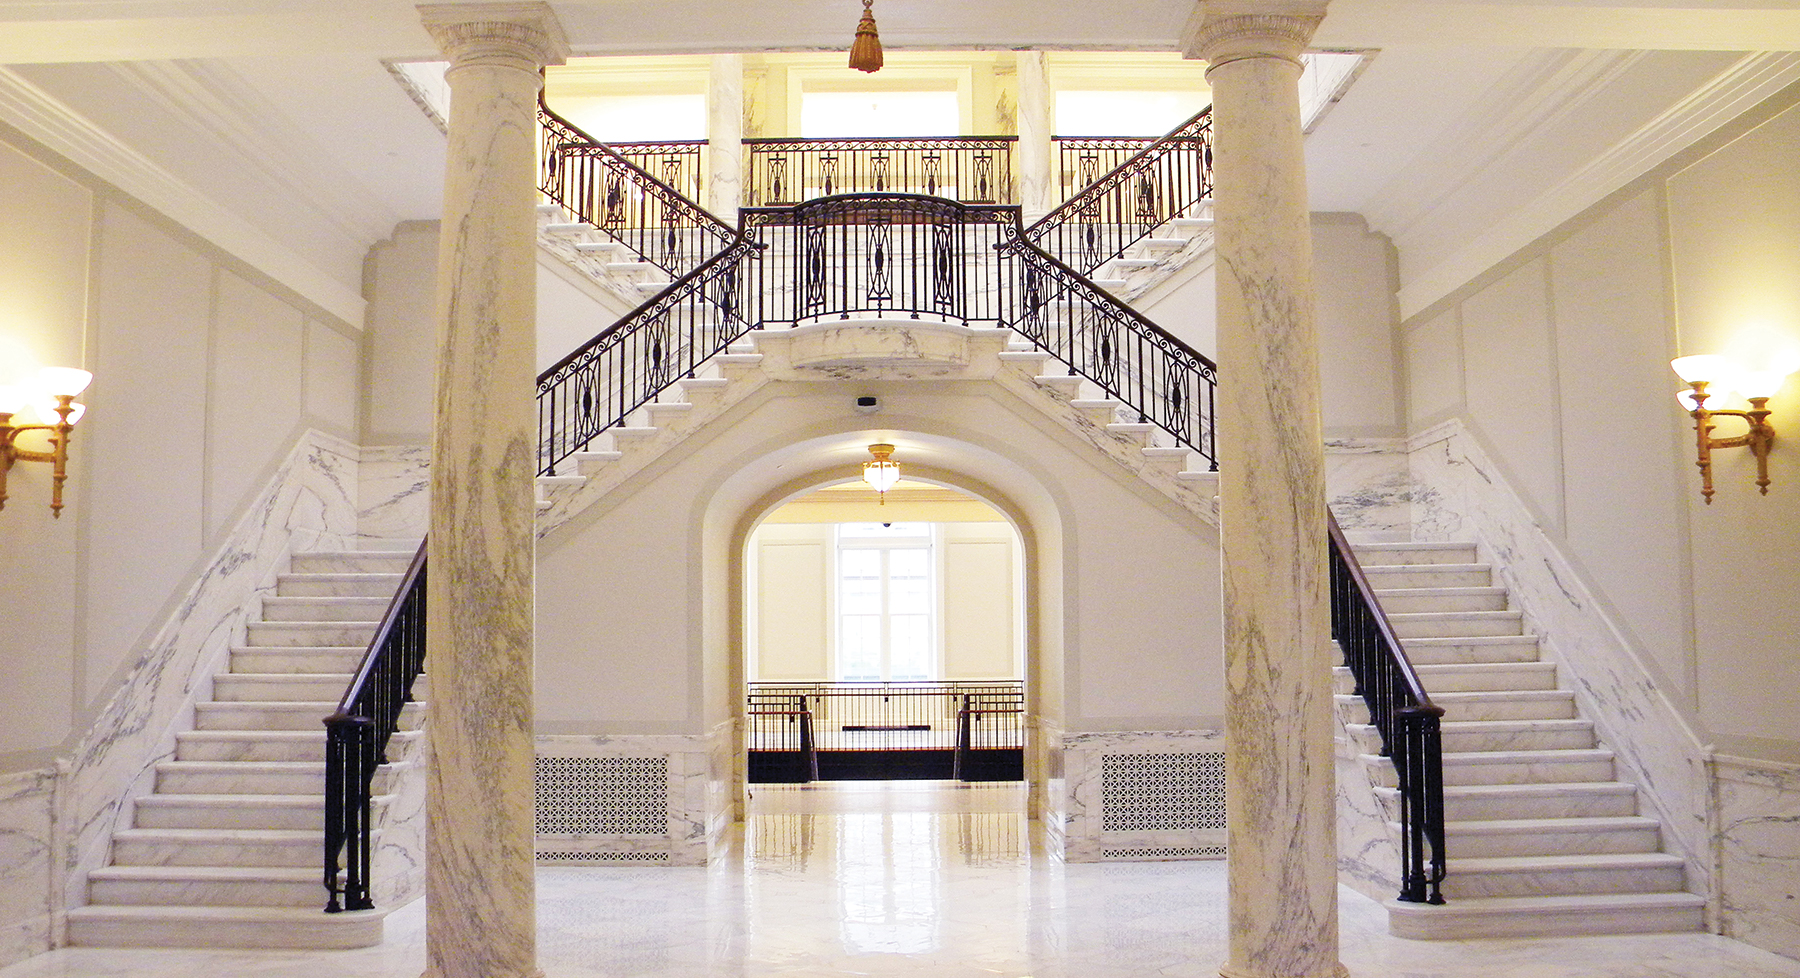 Court of Appeals Marble Staircase